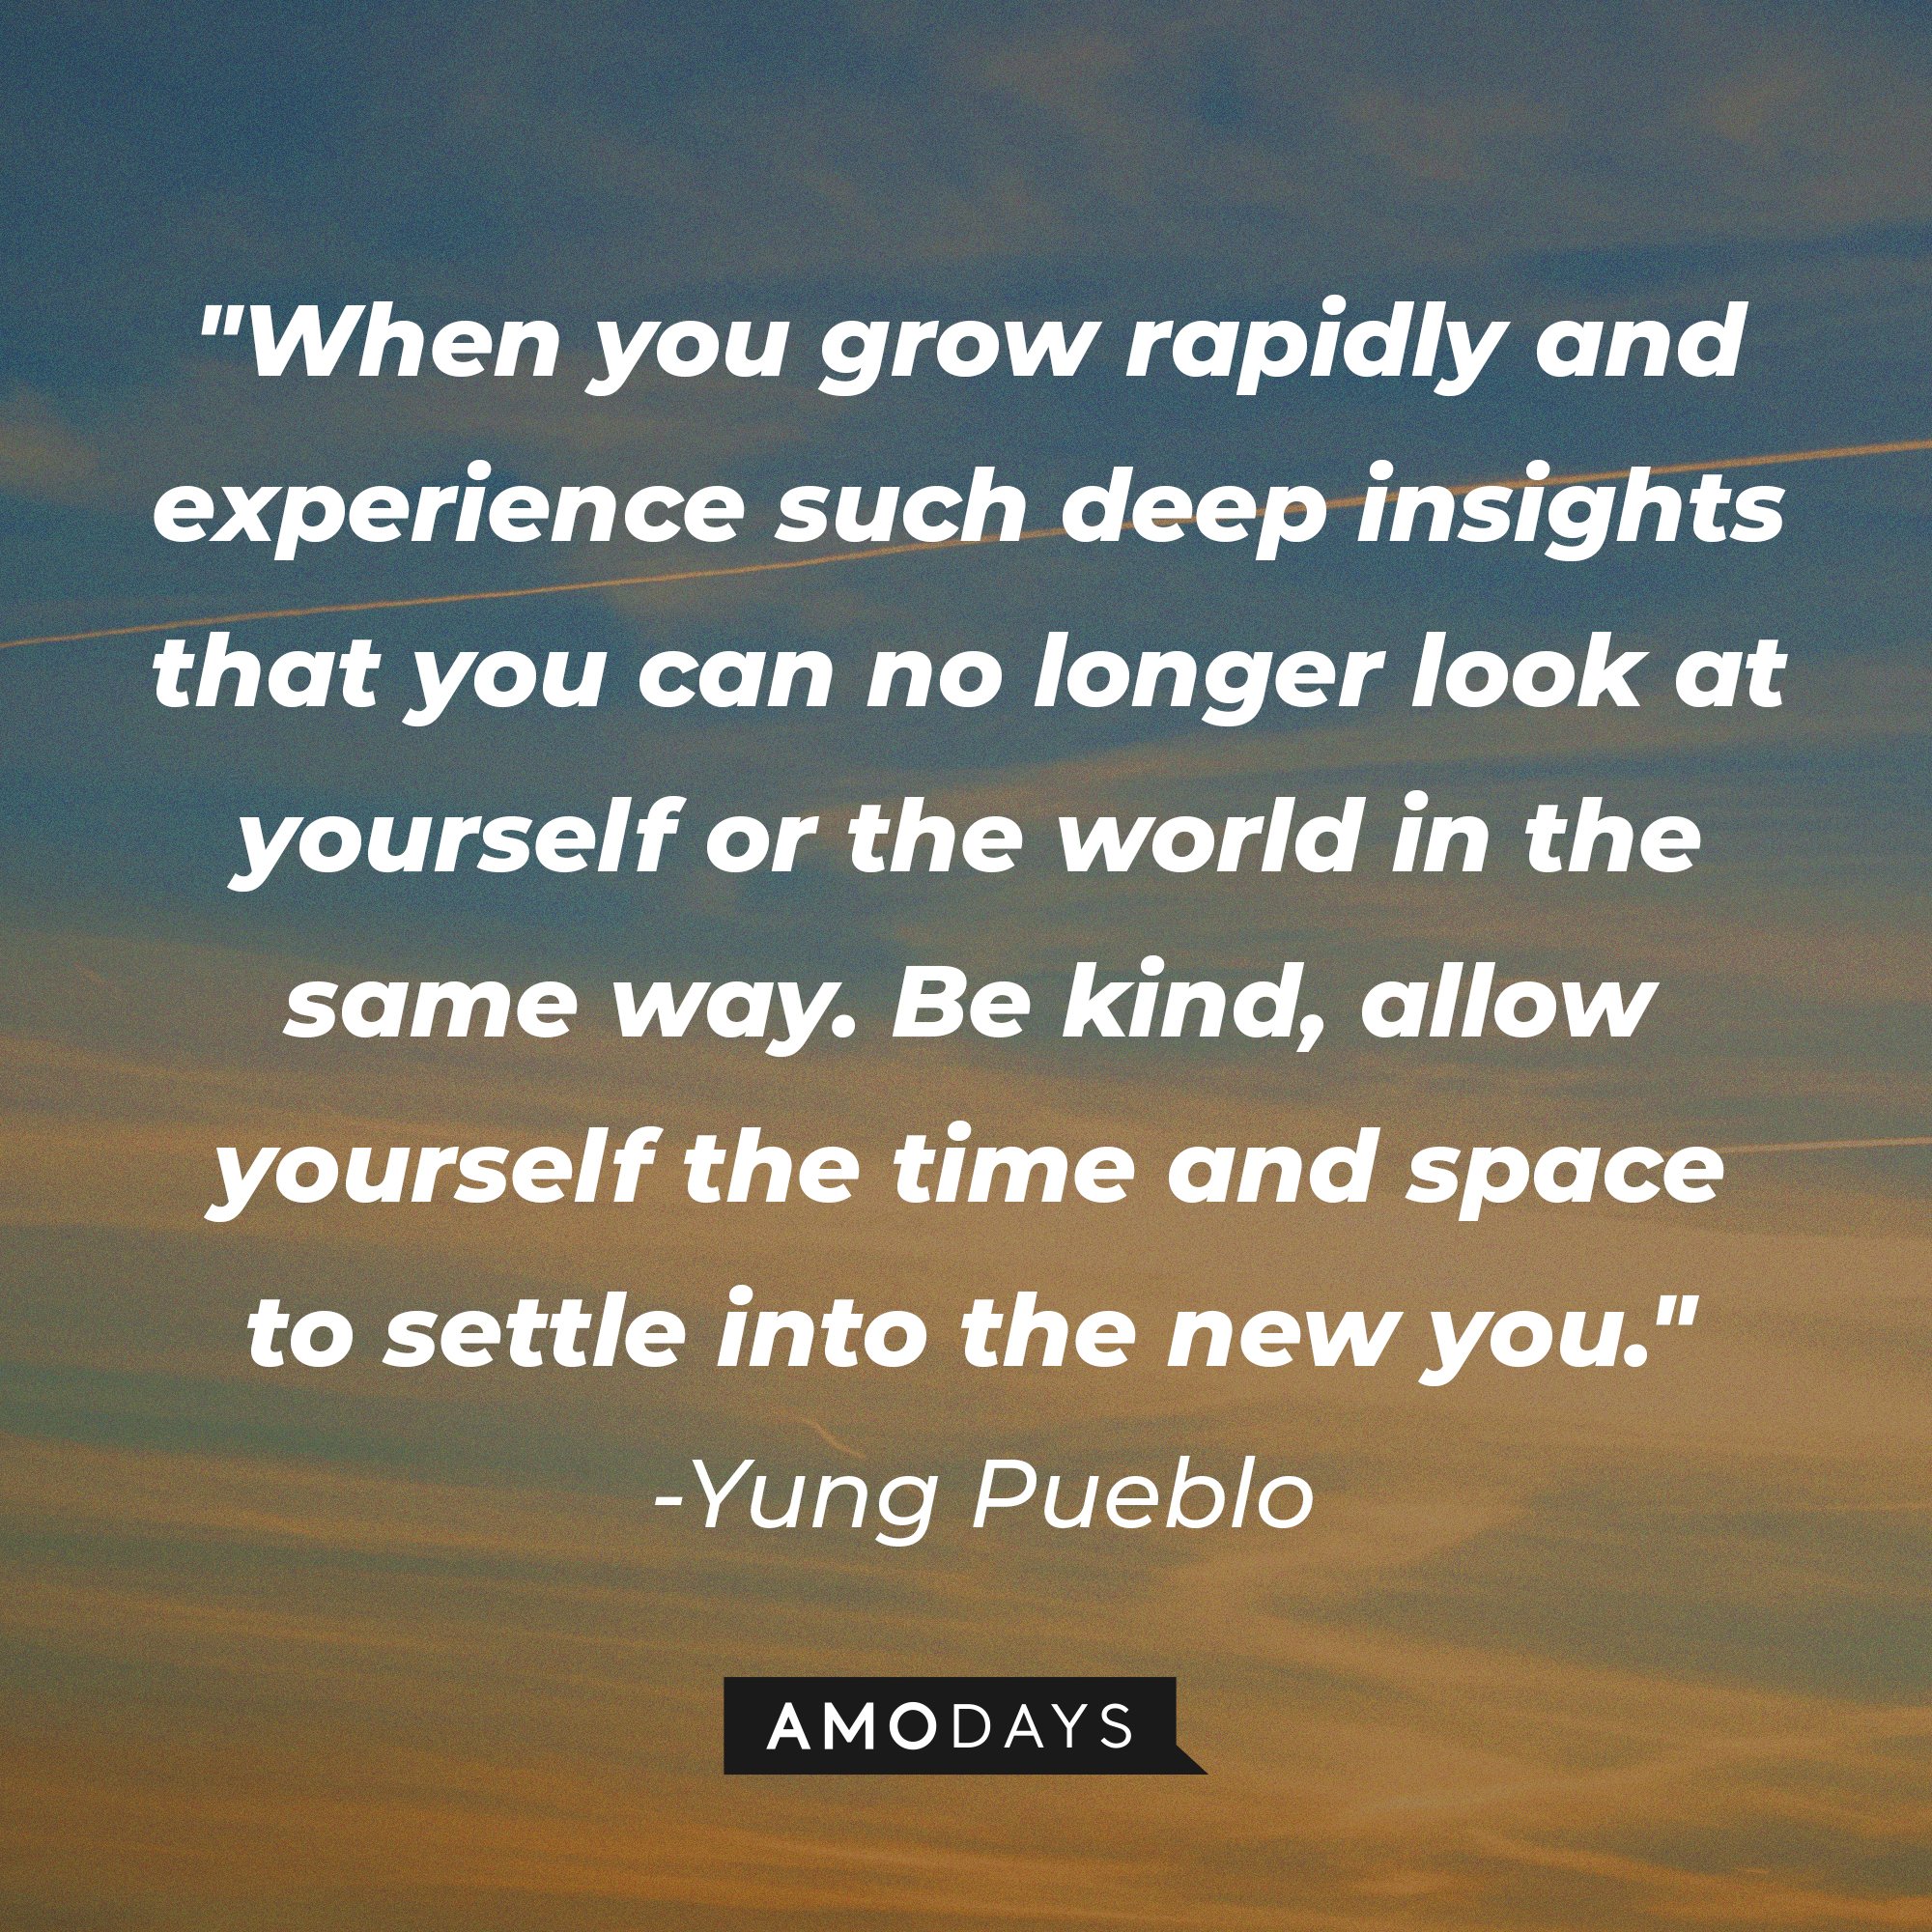 Yung Pueblo's quote "When you grow rapidly and experience such deep insights that you can no longer look at yourself or the world in the same way. Be kind, allow yourself the time and space to settle into the new you." | Source: Unsplash.com